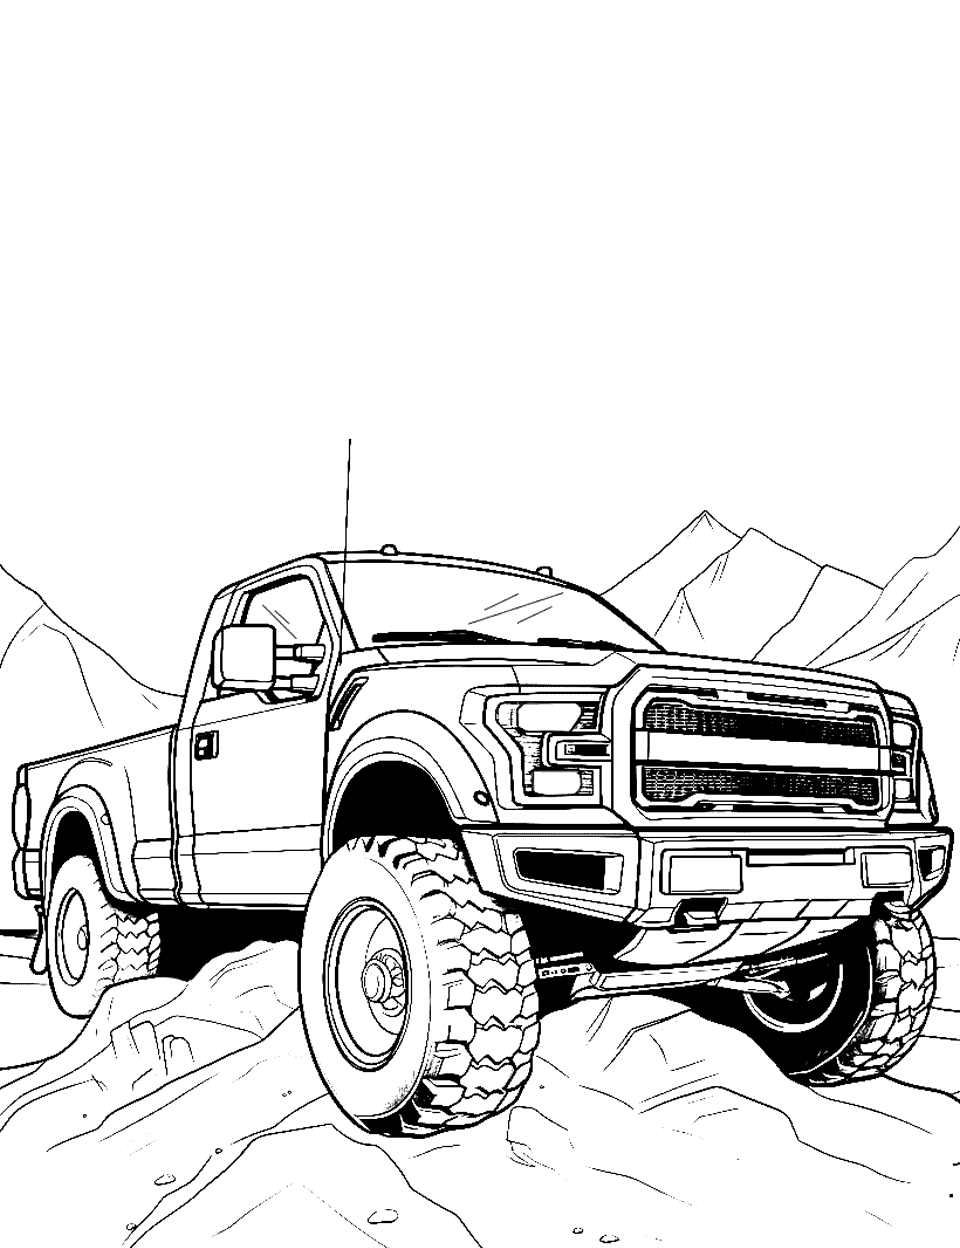 Ford Raptor Adventure Coloring Page - A Ford Raptor navigating through rocky terrain, stones scattered around.